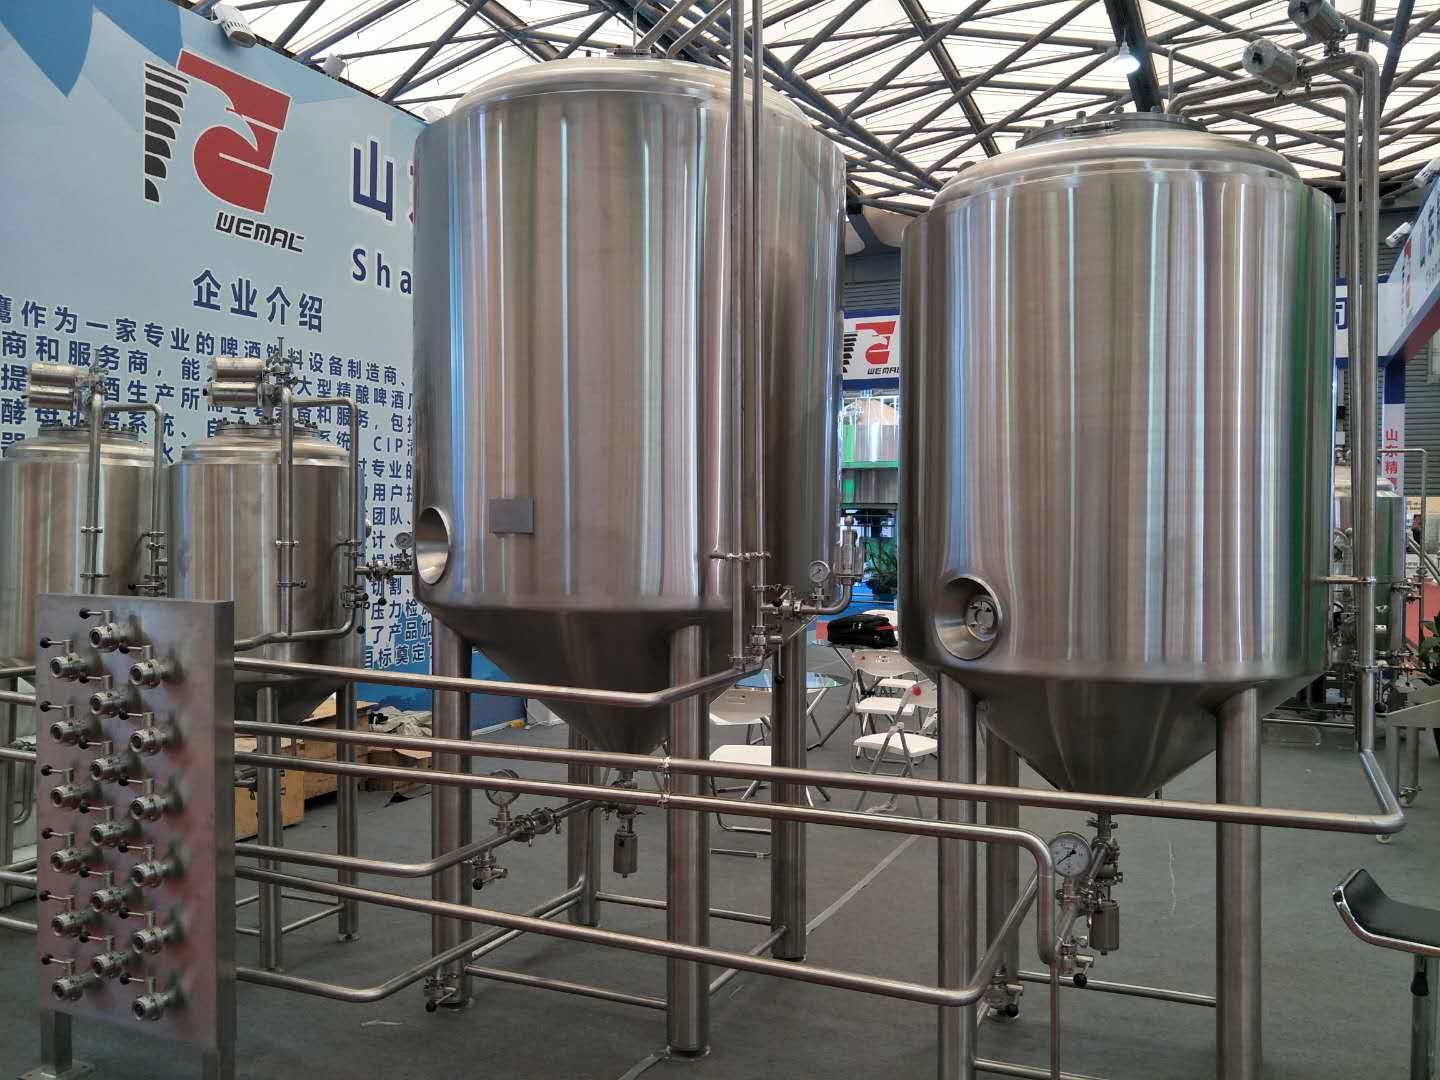 3 stages yeast breeding system and propagation equipment widely used in beer brewery from WEMAC 